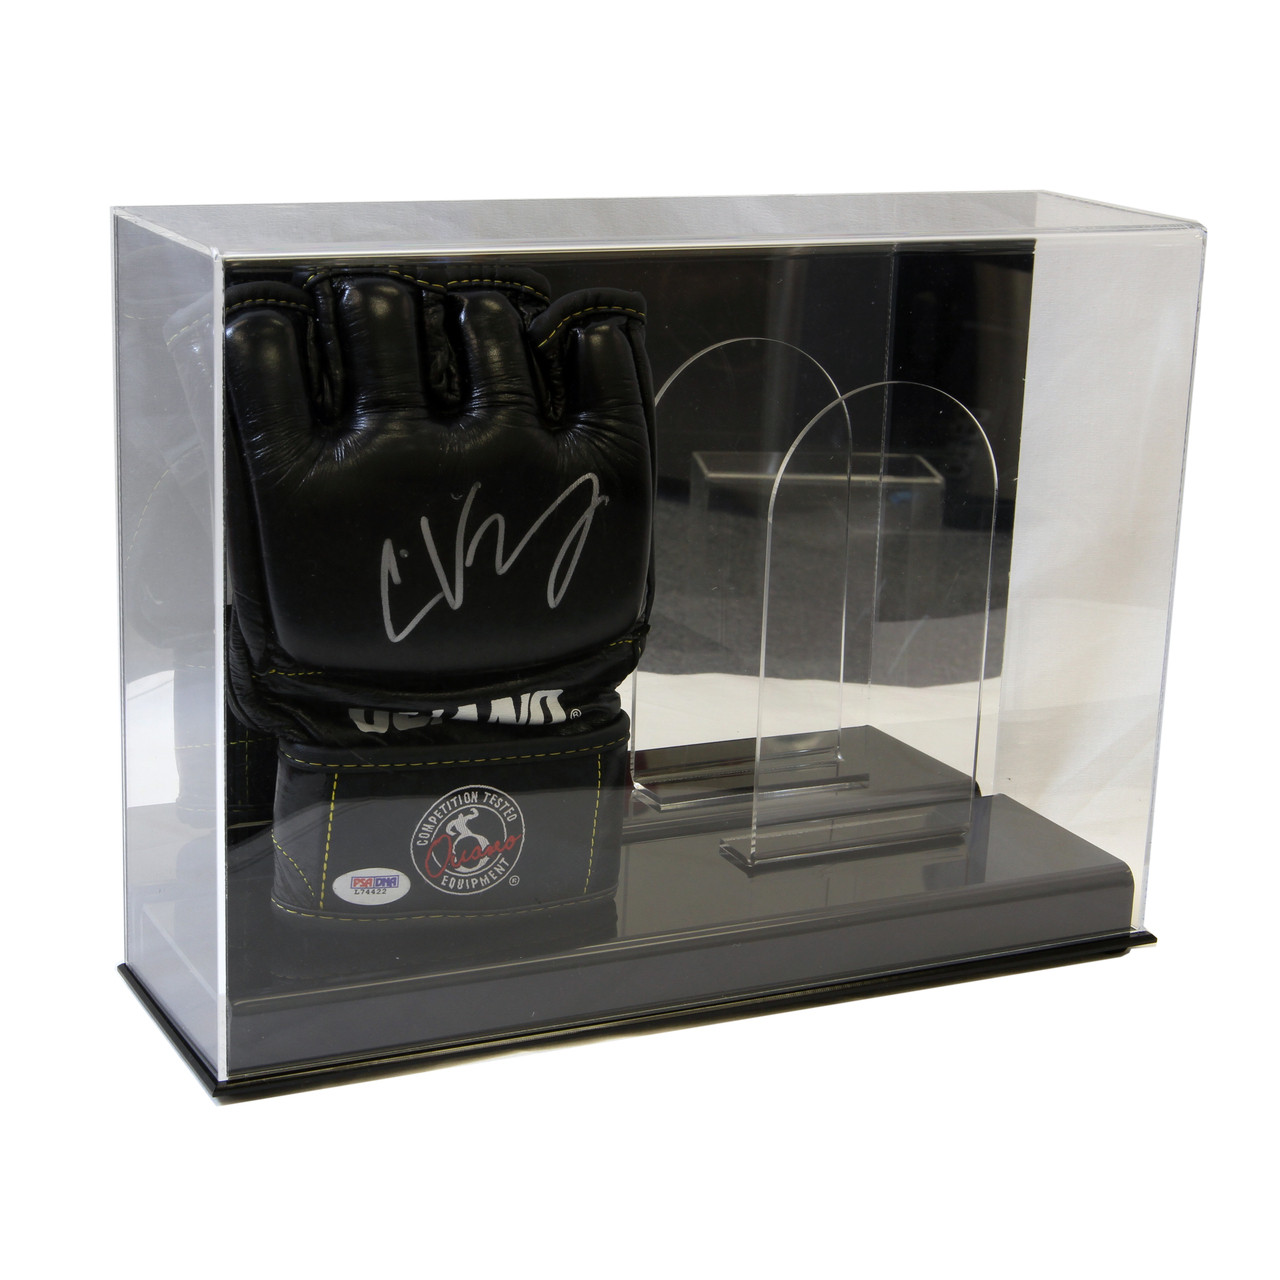 Double Baseball Batting Glove or Football Glove Display Case with Mirror Back 